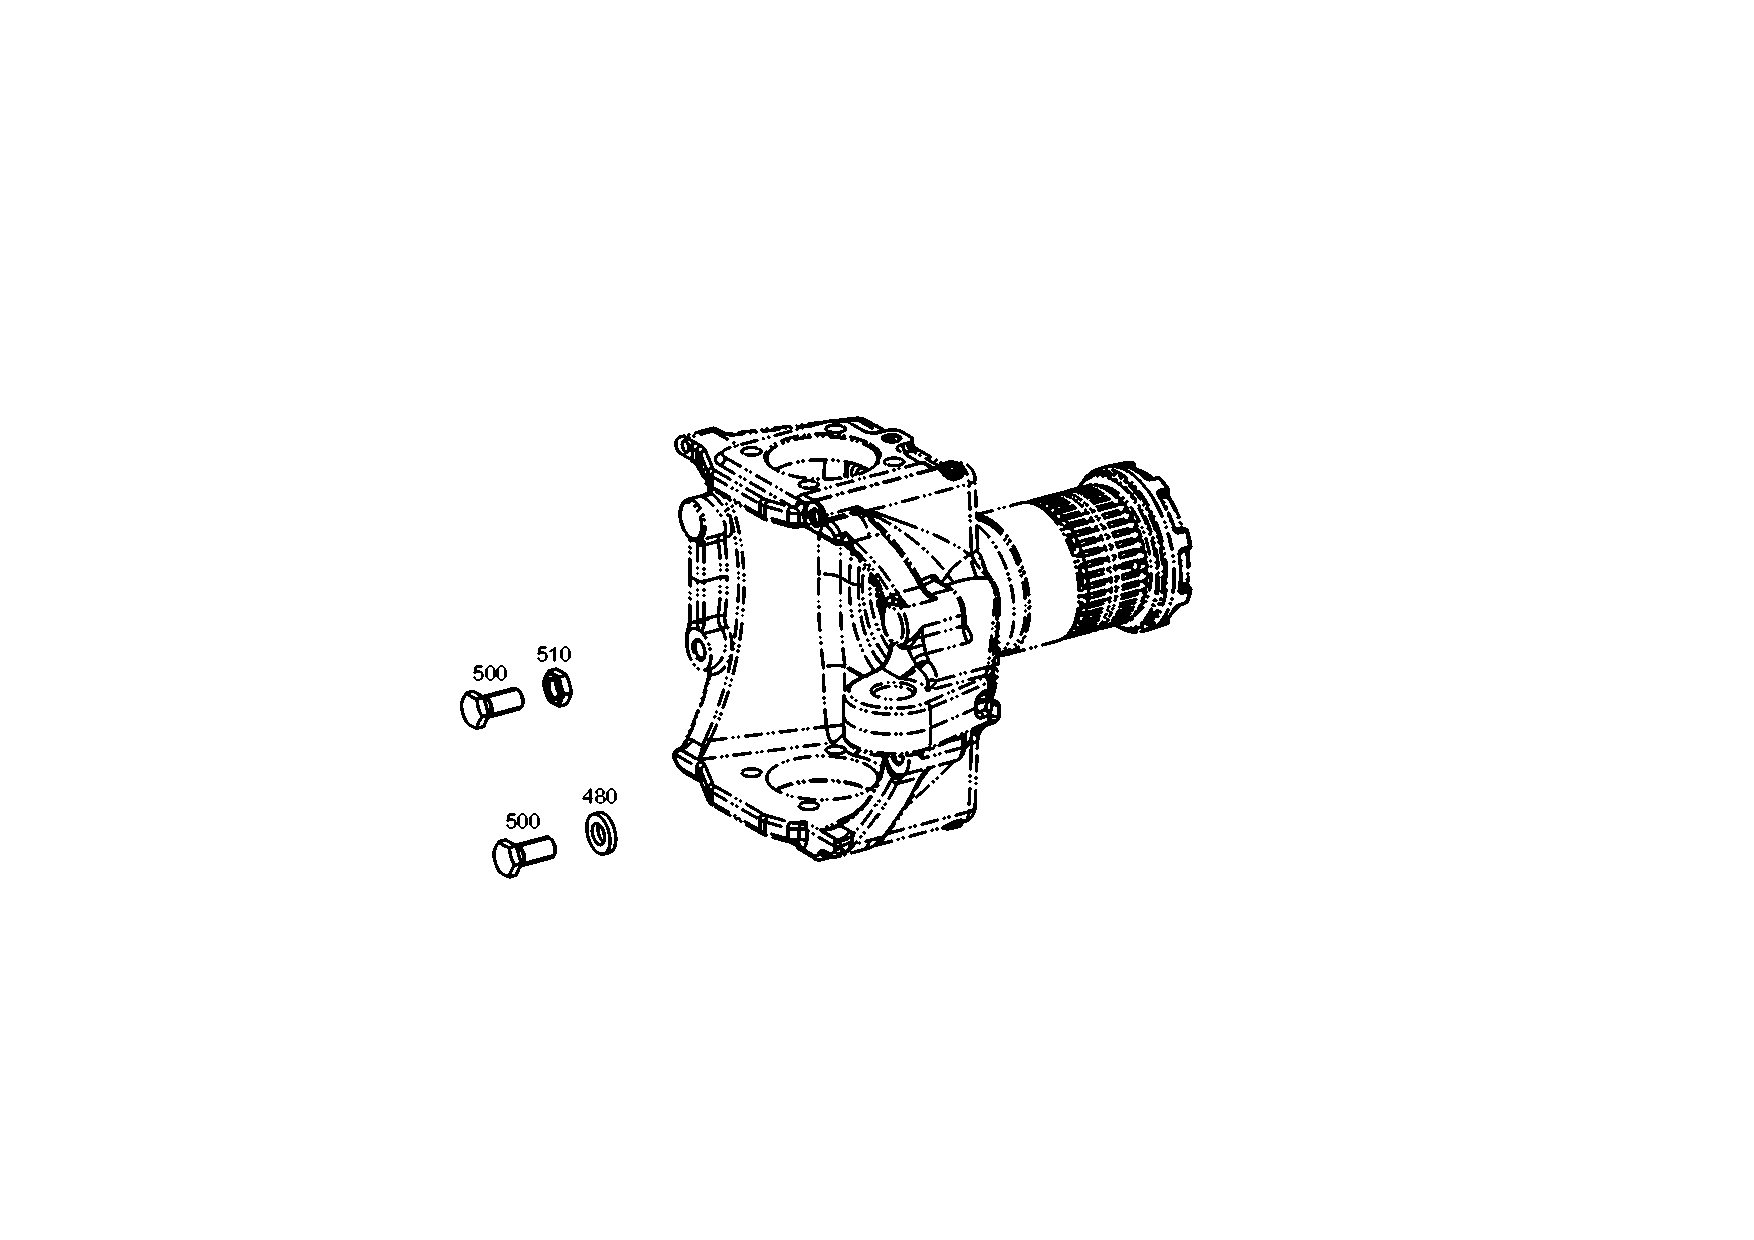 drawing for CATERPILLAR INC. 028784 - STOP WASHER (figure 4)